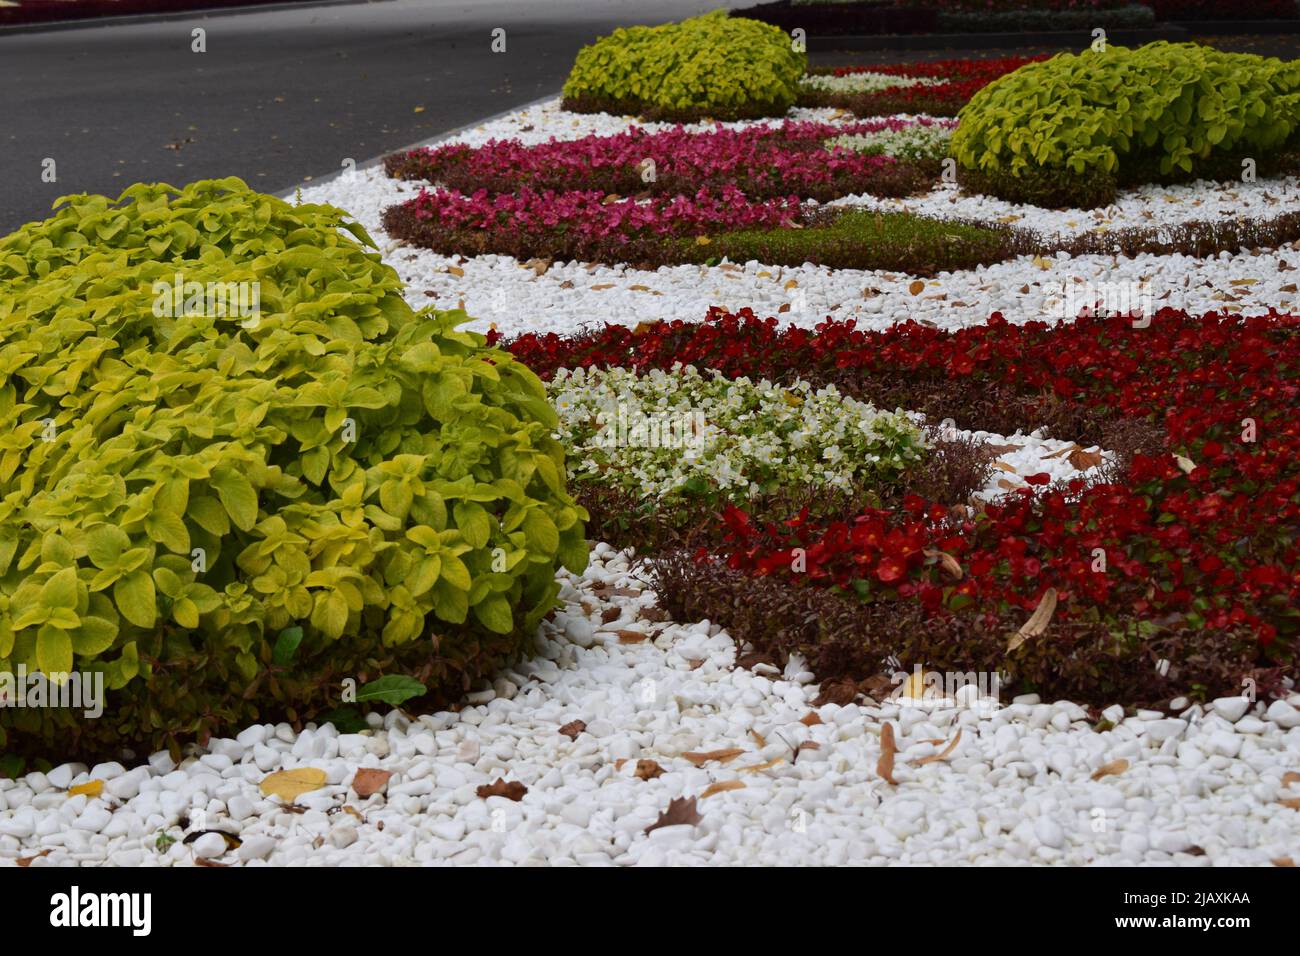 Flowers, Marigold, Bedding Begonia. Flowerbed with yellow marigolds close-up and Begonia. Flowerbed decoration in a city park. Yellow Marigolds flower Stock Photo